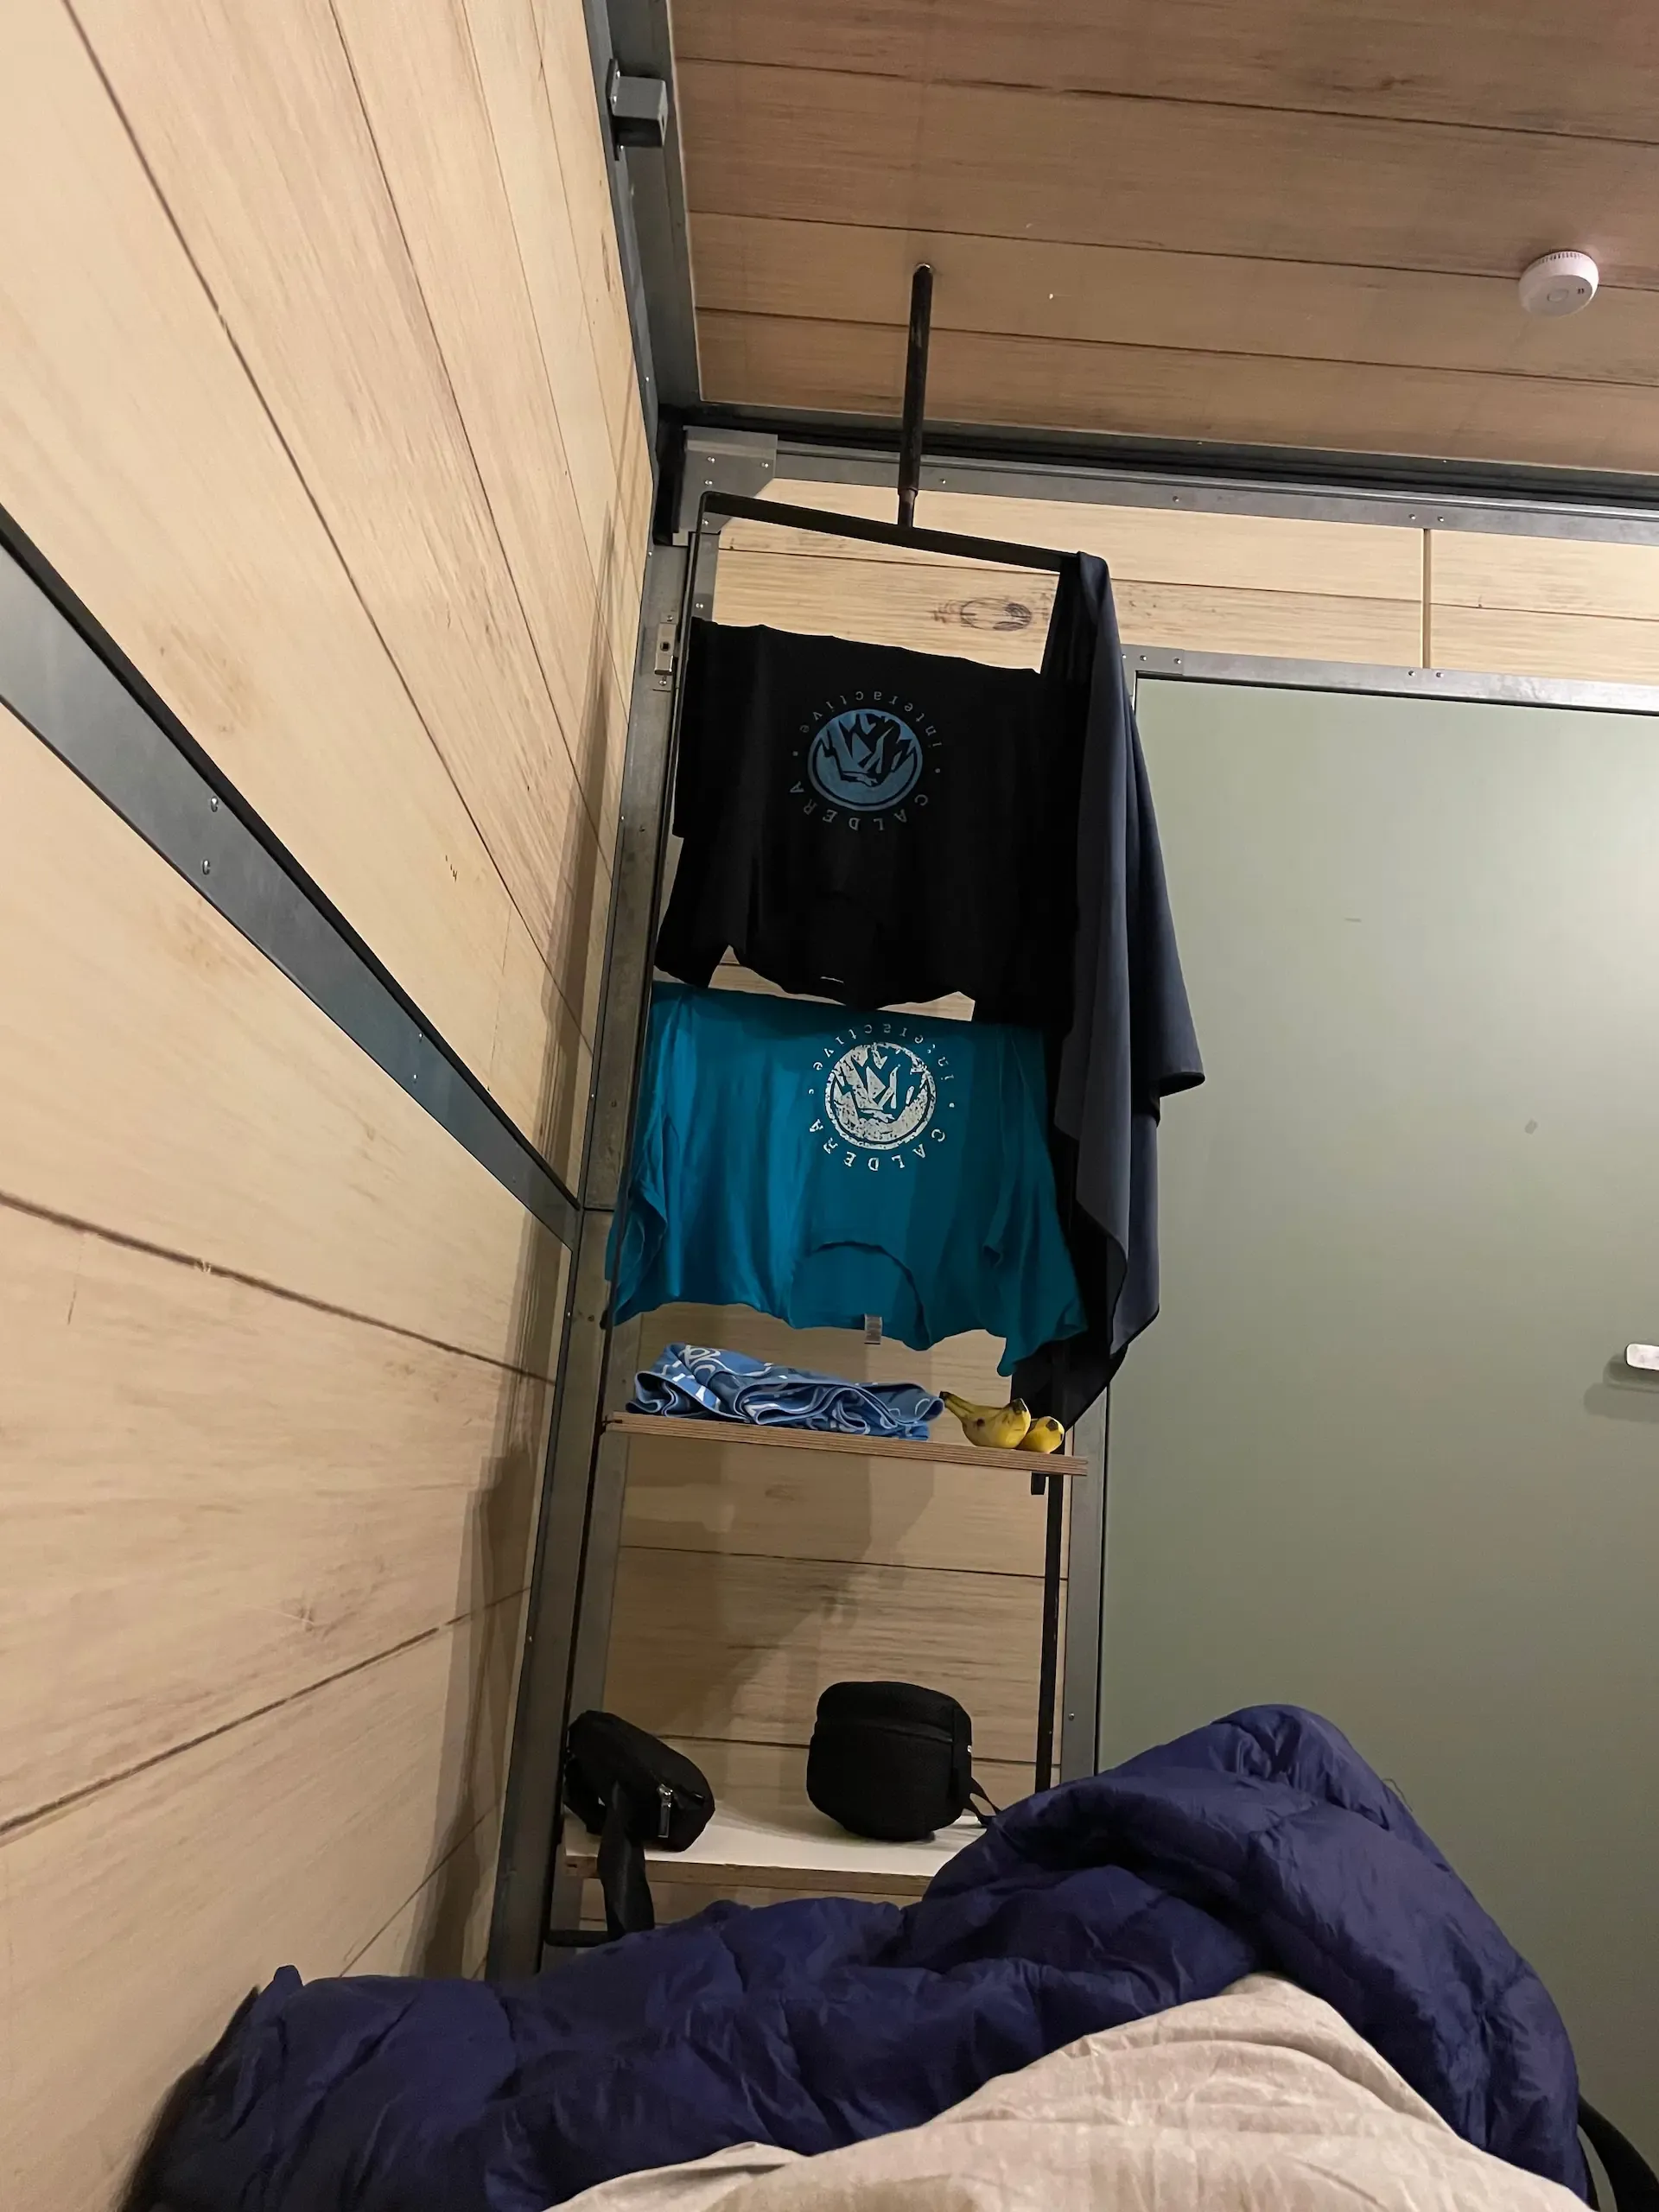 Photo of Caldera t-shirts drying overnight in our room